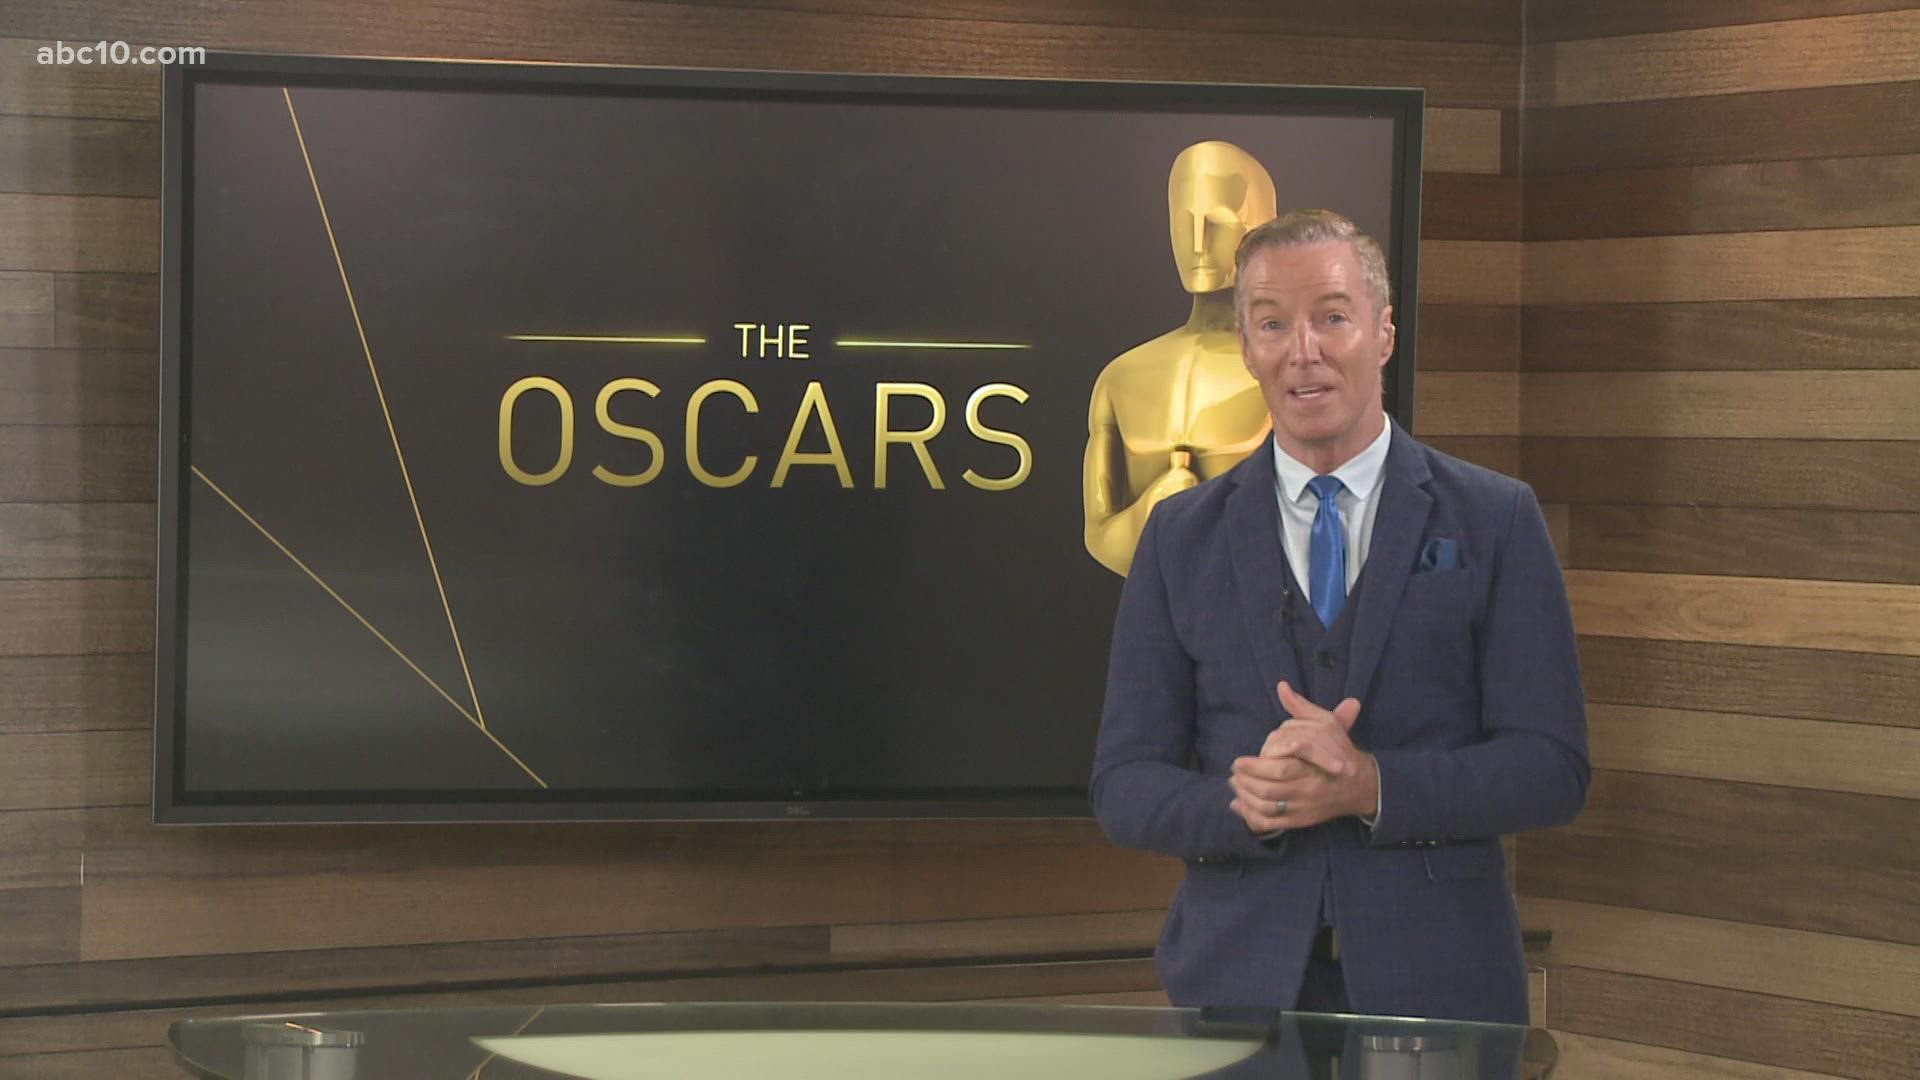 Our Mark S. Allen breaks down his Oscar predictions as he takes a look at the list of best film nominations for the 94th Academy Awards.